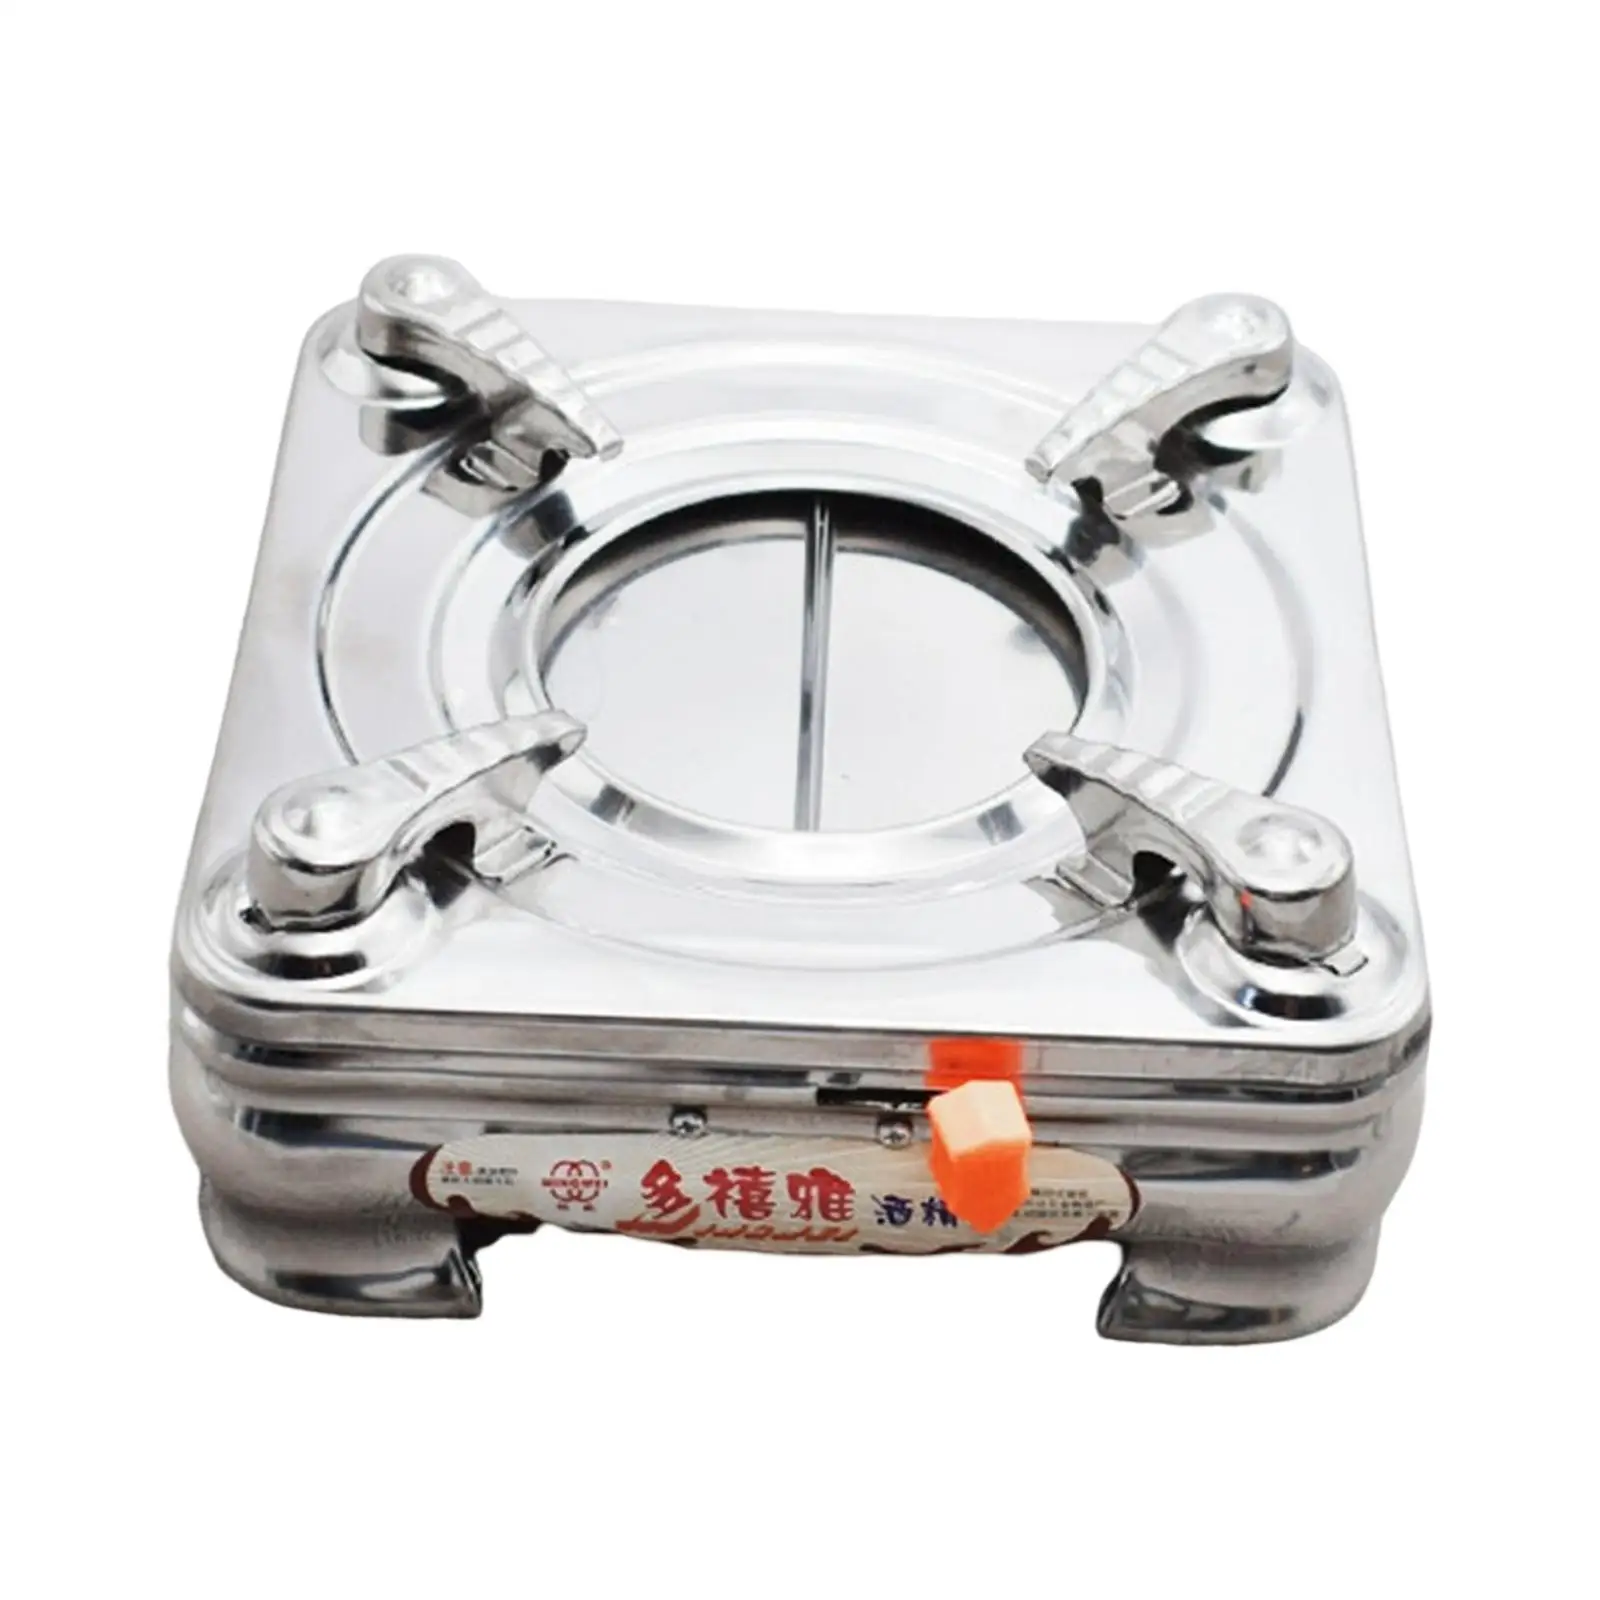 Portable Alcohol Stove Camping Stove Anti Slip Supporting Feet Lightweight Convenient to Store and Carry Stable Cookware Durable